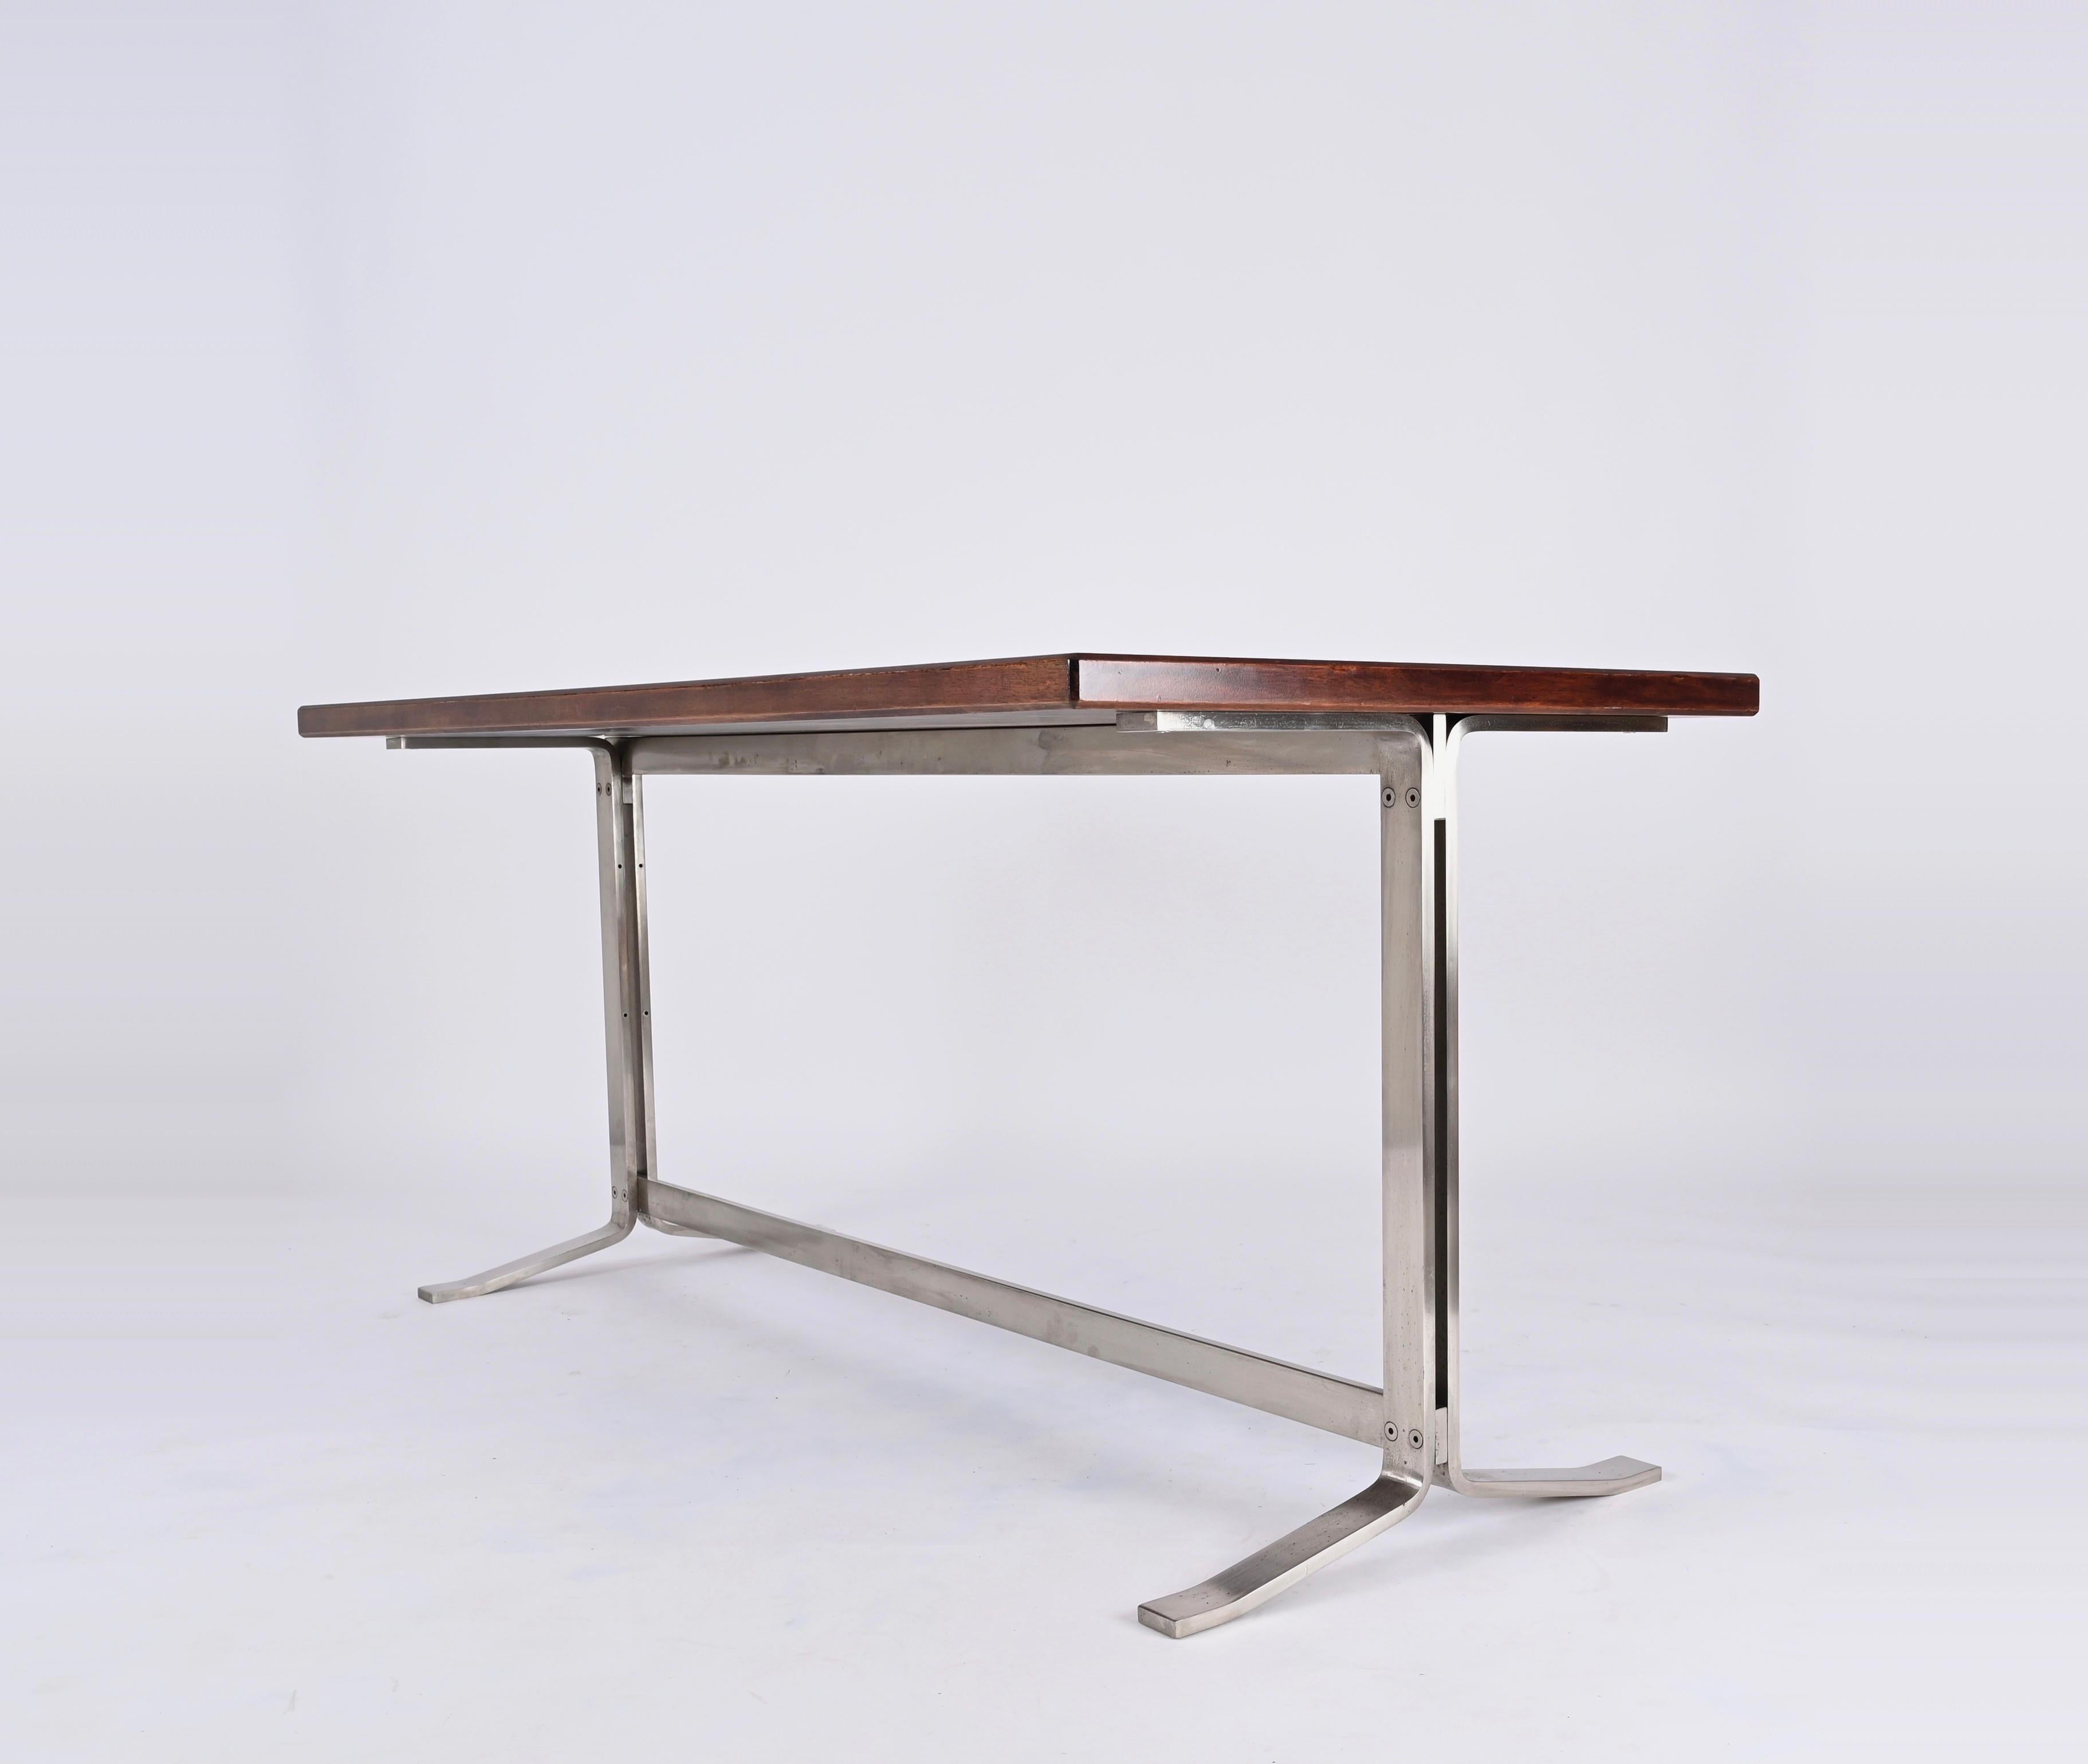 Mid-20th Century Midcentury Desk in Walnut and Steel by Moscatelli for Formanova, Italy, 1965 For Sale